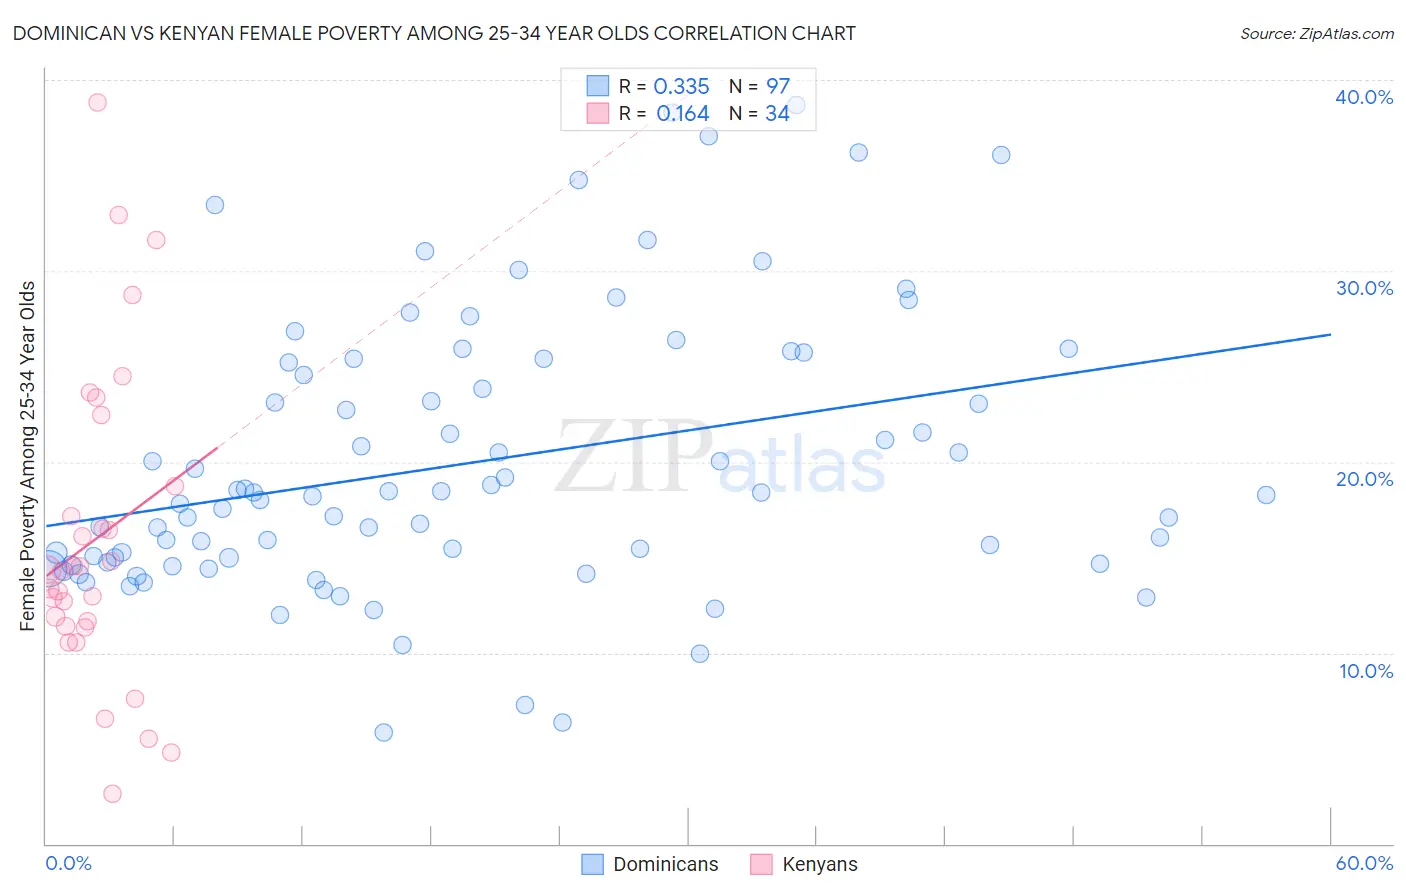 Dominican vs Kenyan Female Poverty Among 25-34 Year Olds